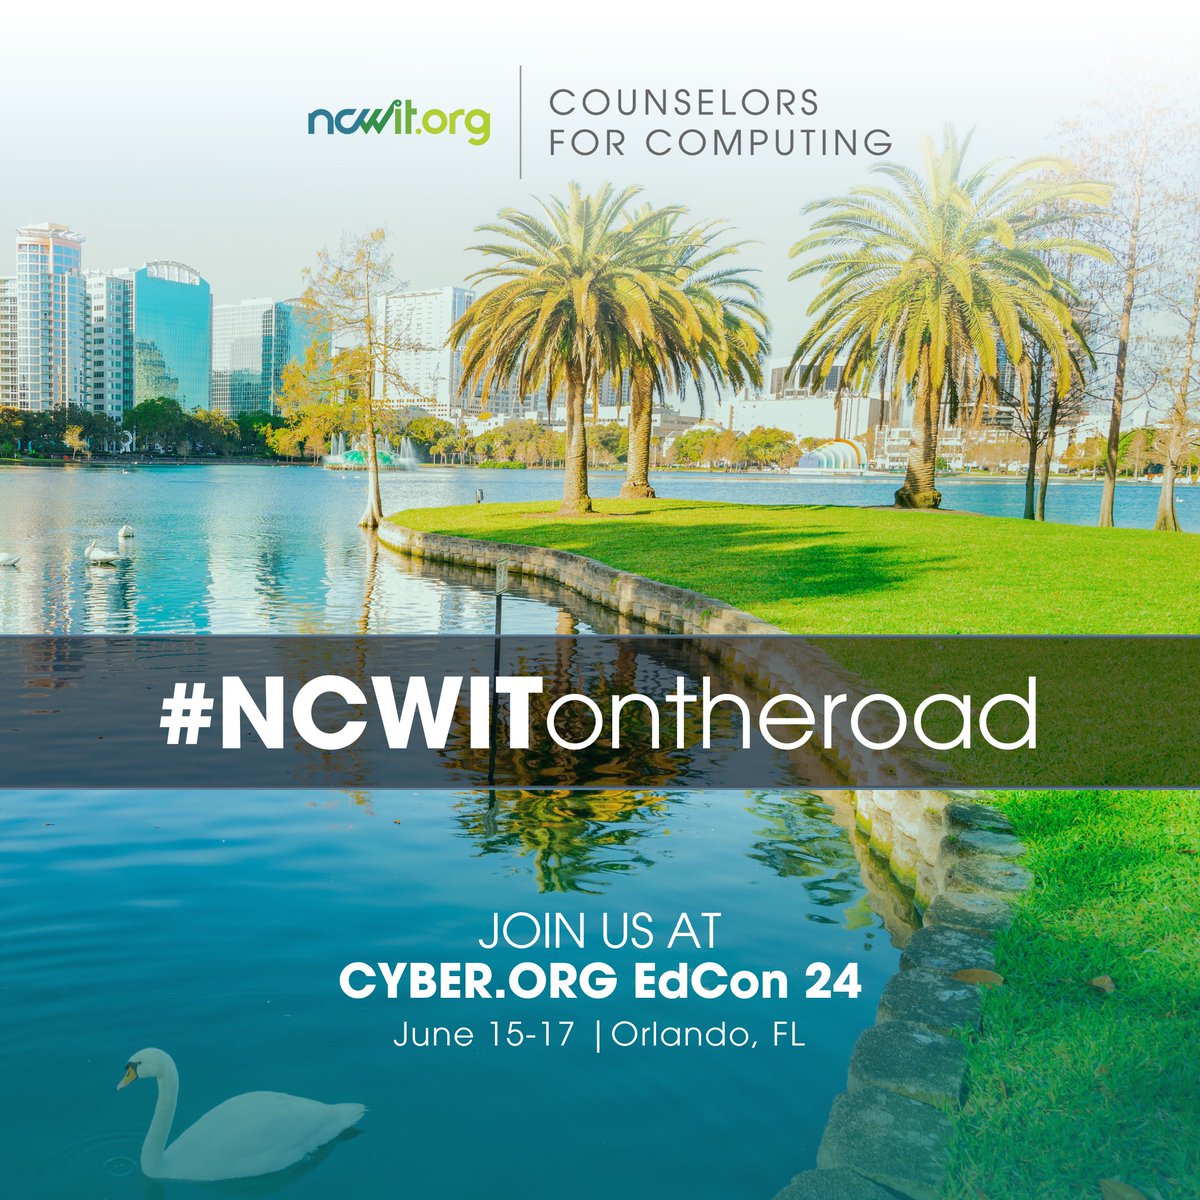 If you're planning to attend EdCon 24 in Orlando with @cyber_dot_org, be sure to connect with #NCWITontheroad!

📌 Find the complete list of all the sessions with #NCWITC4C and @NCWIT Alliance members online: ncwit.org/event/ncwitc4c…

Learn more + register: cyber.org/EdCon